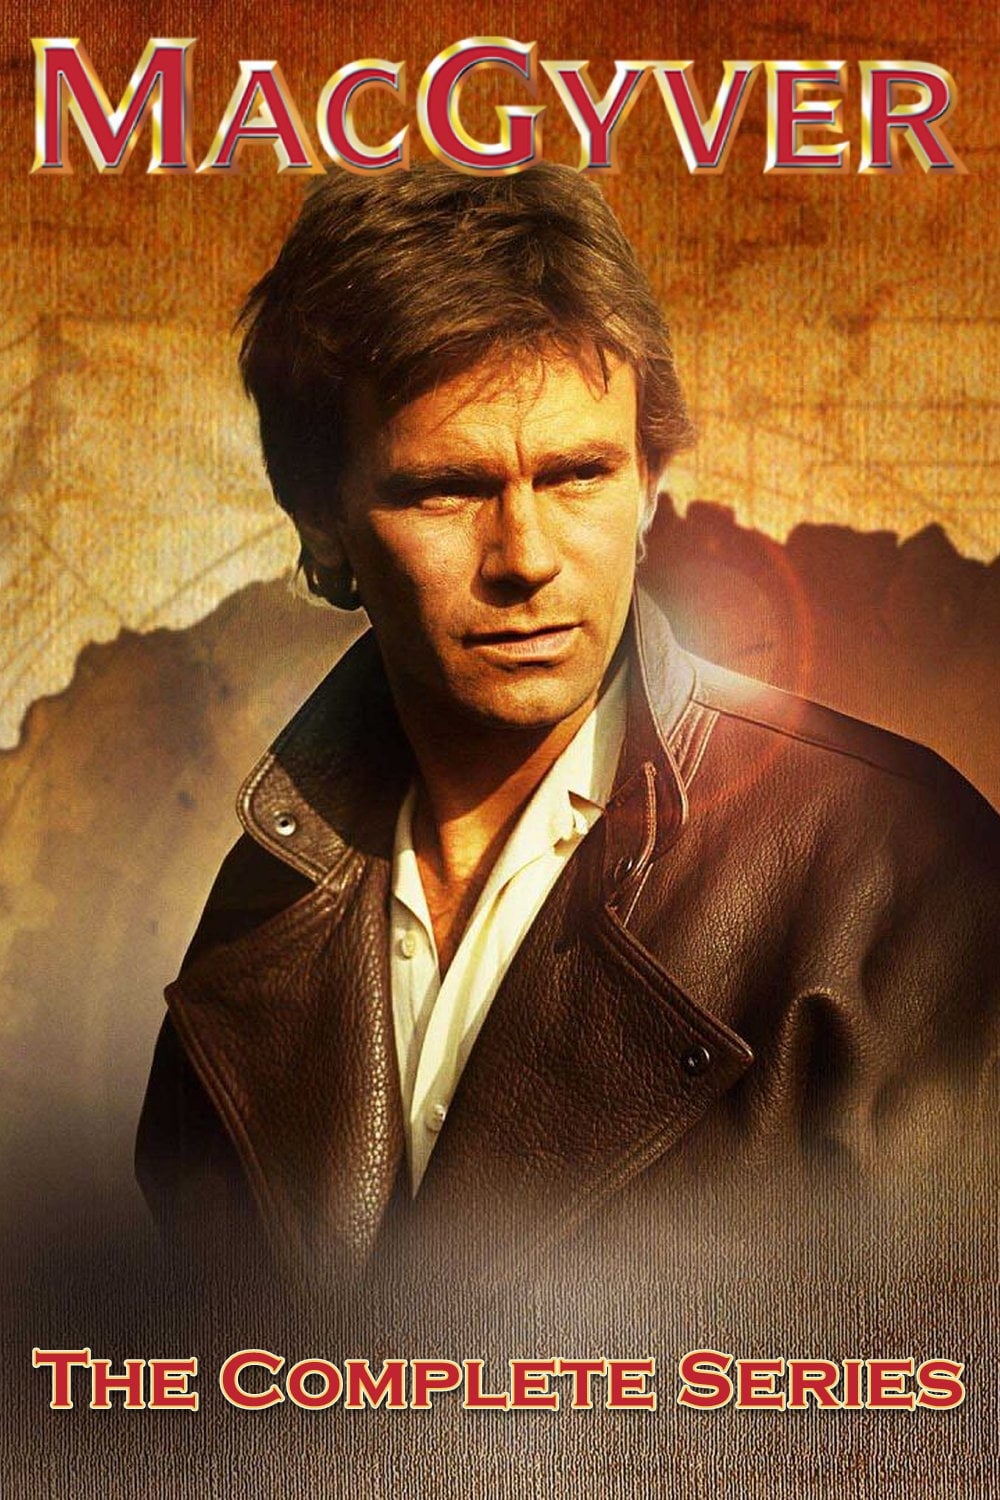 MacGyver TV Shows About Good Versus Evil